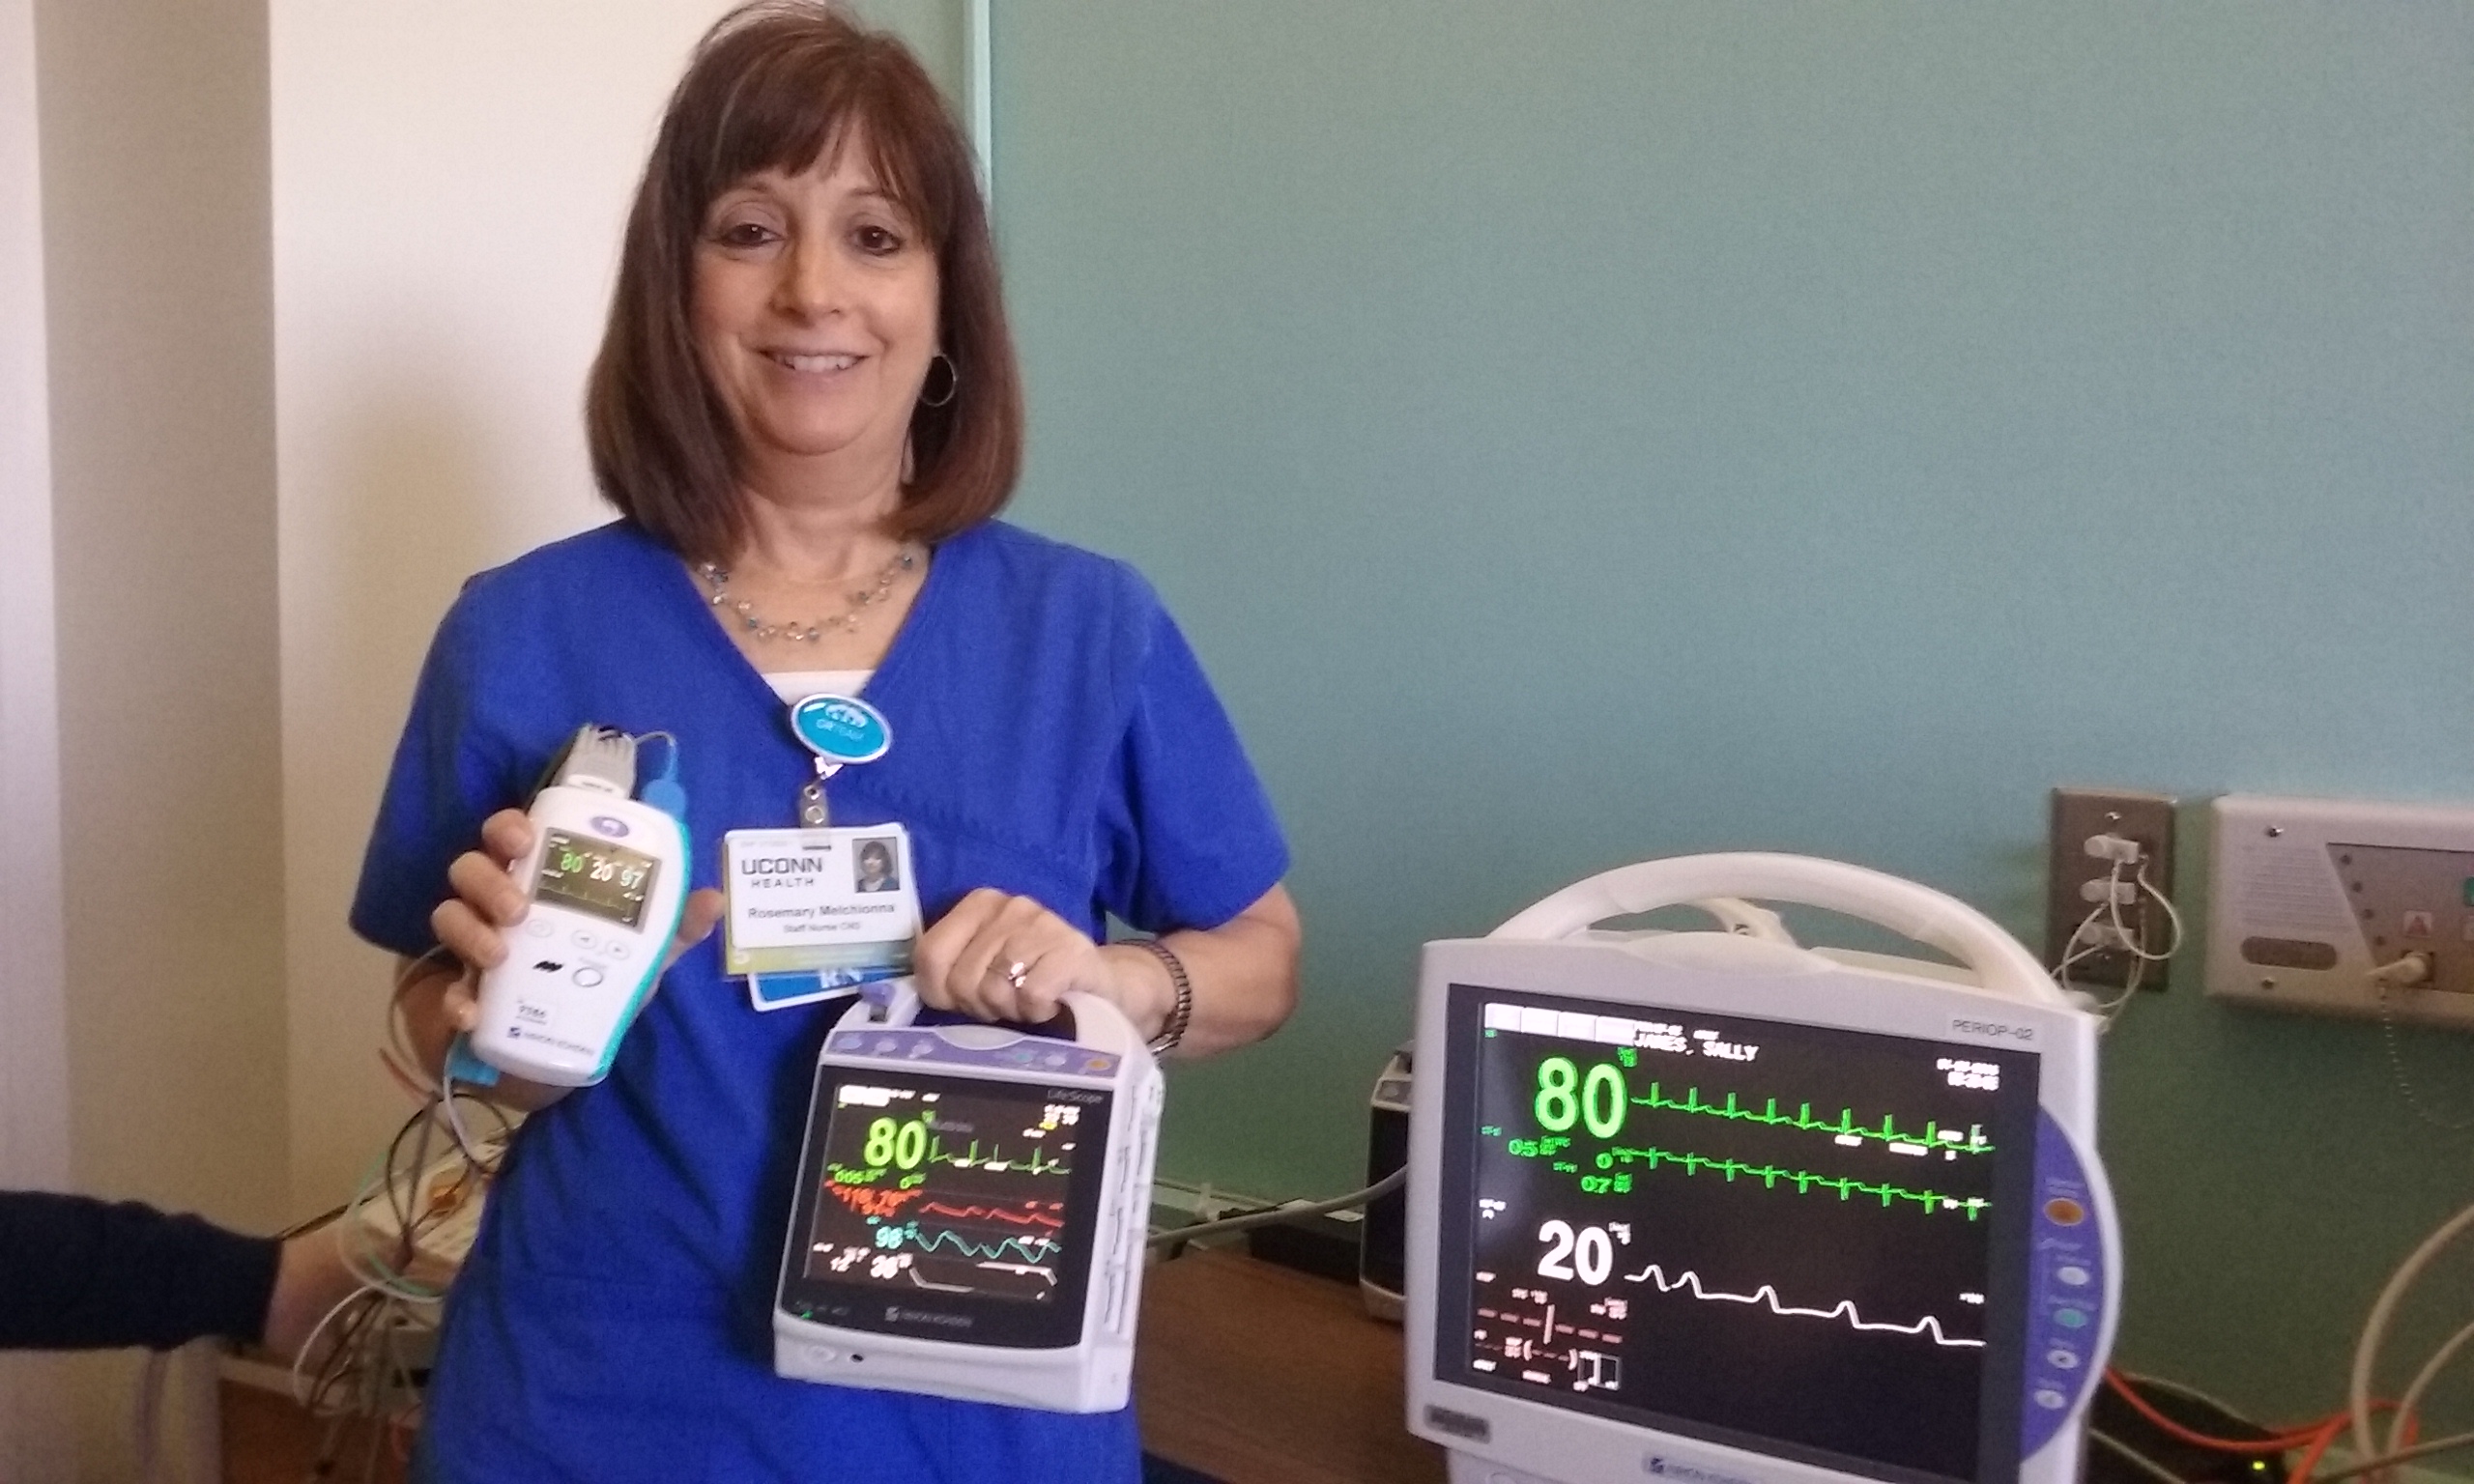 Rosemary Melchionna, a nurse in the post-anesthesia care unit, shows the updated central monitoring technology.